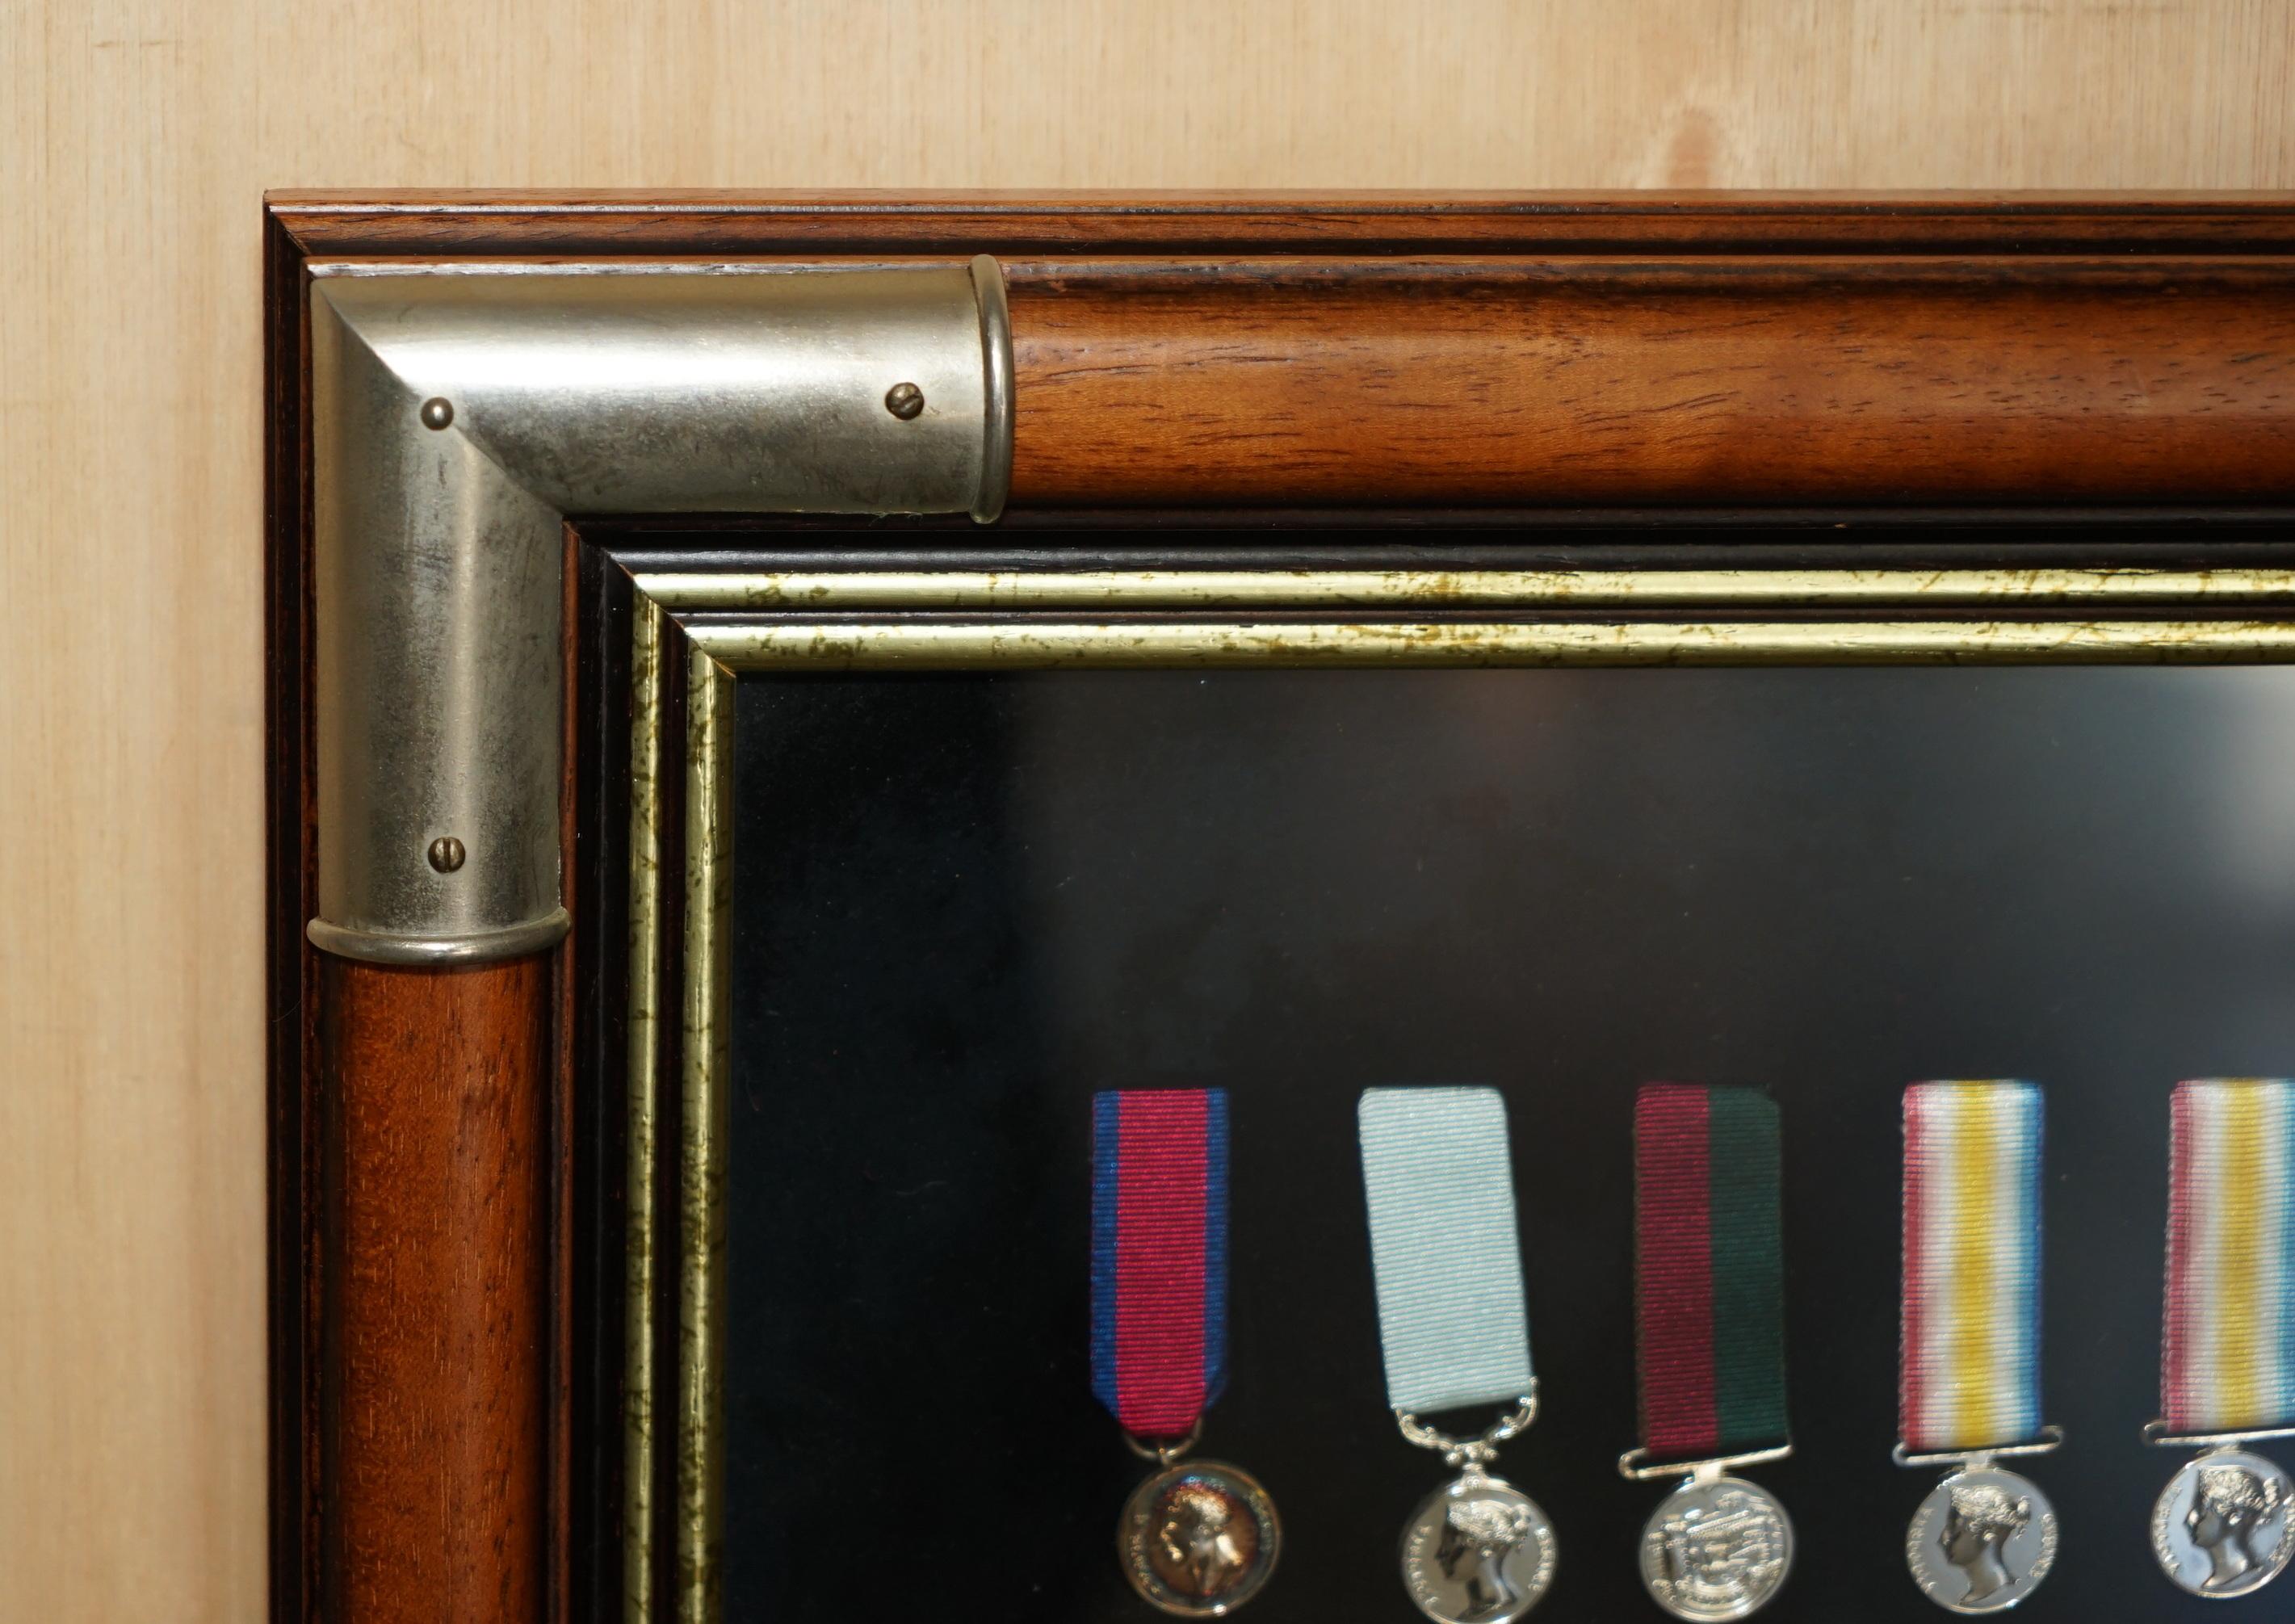 Royal House Antiques

Royal House Antiques is delighted to offer for sale this very decorative display case housing multiple medals for Britich Campaign & Gallantry 

Please note the delivery fee listed is just a guide, it covers within the M25 only